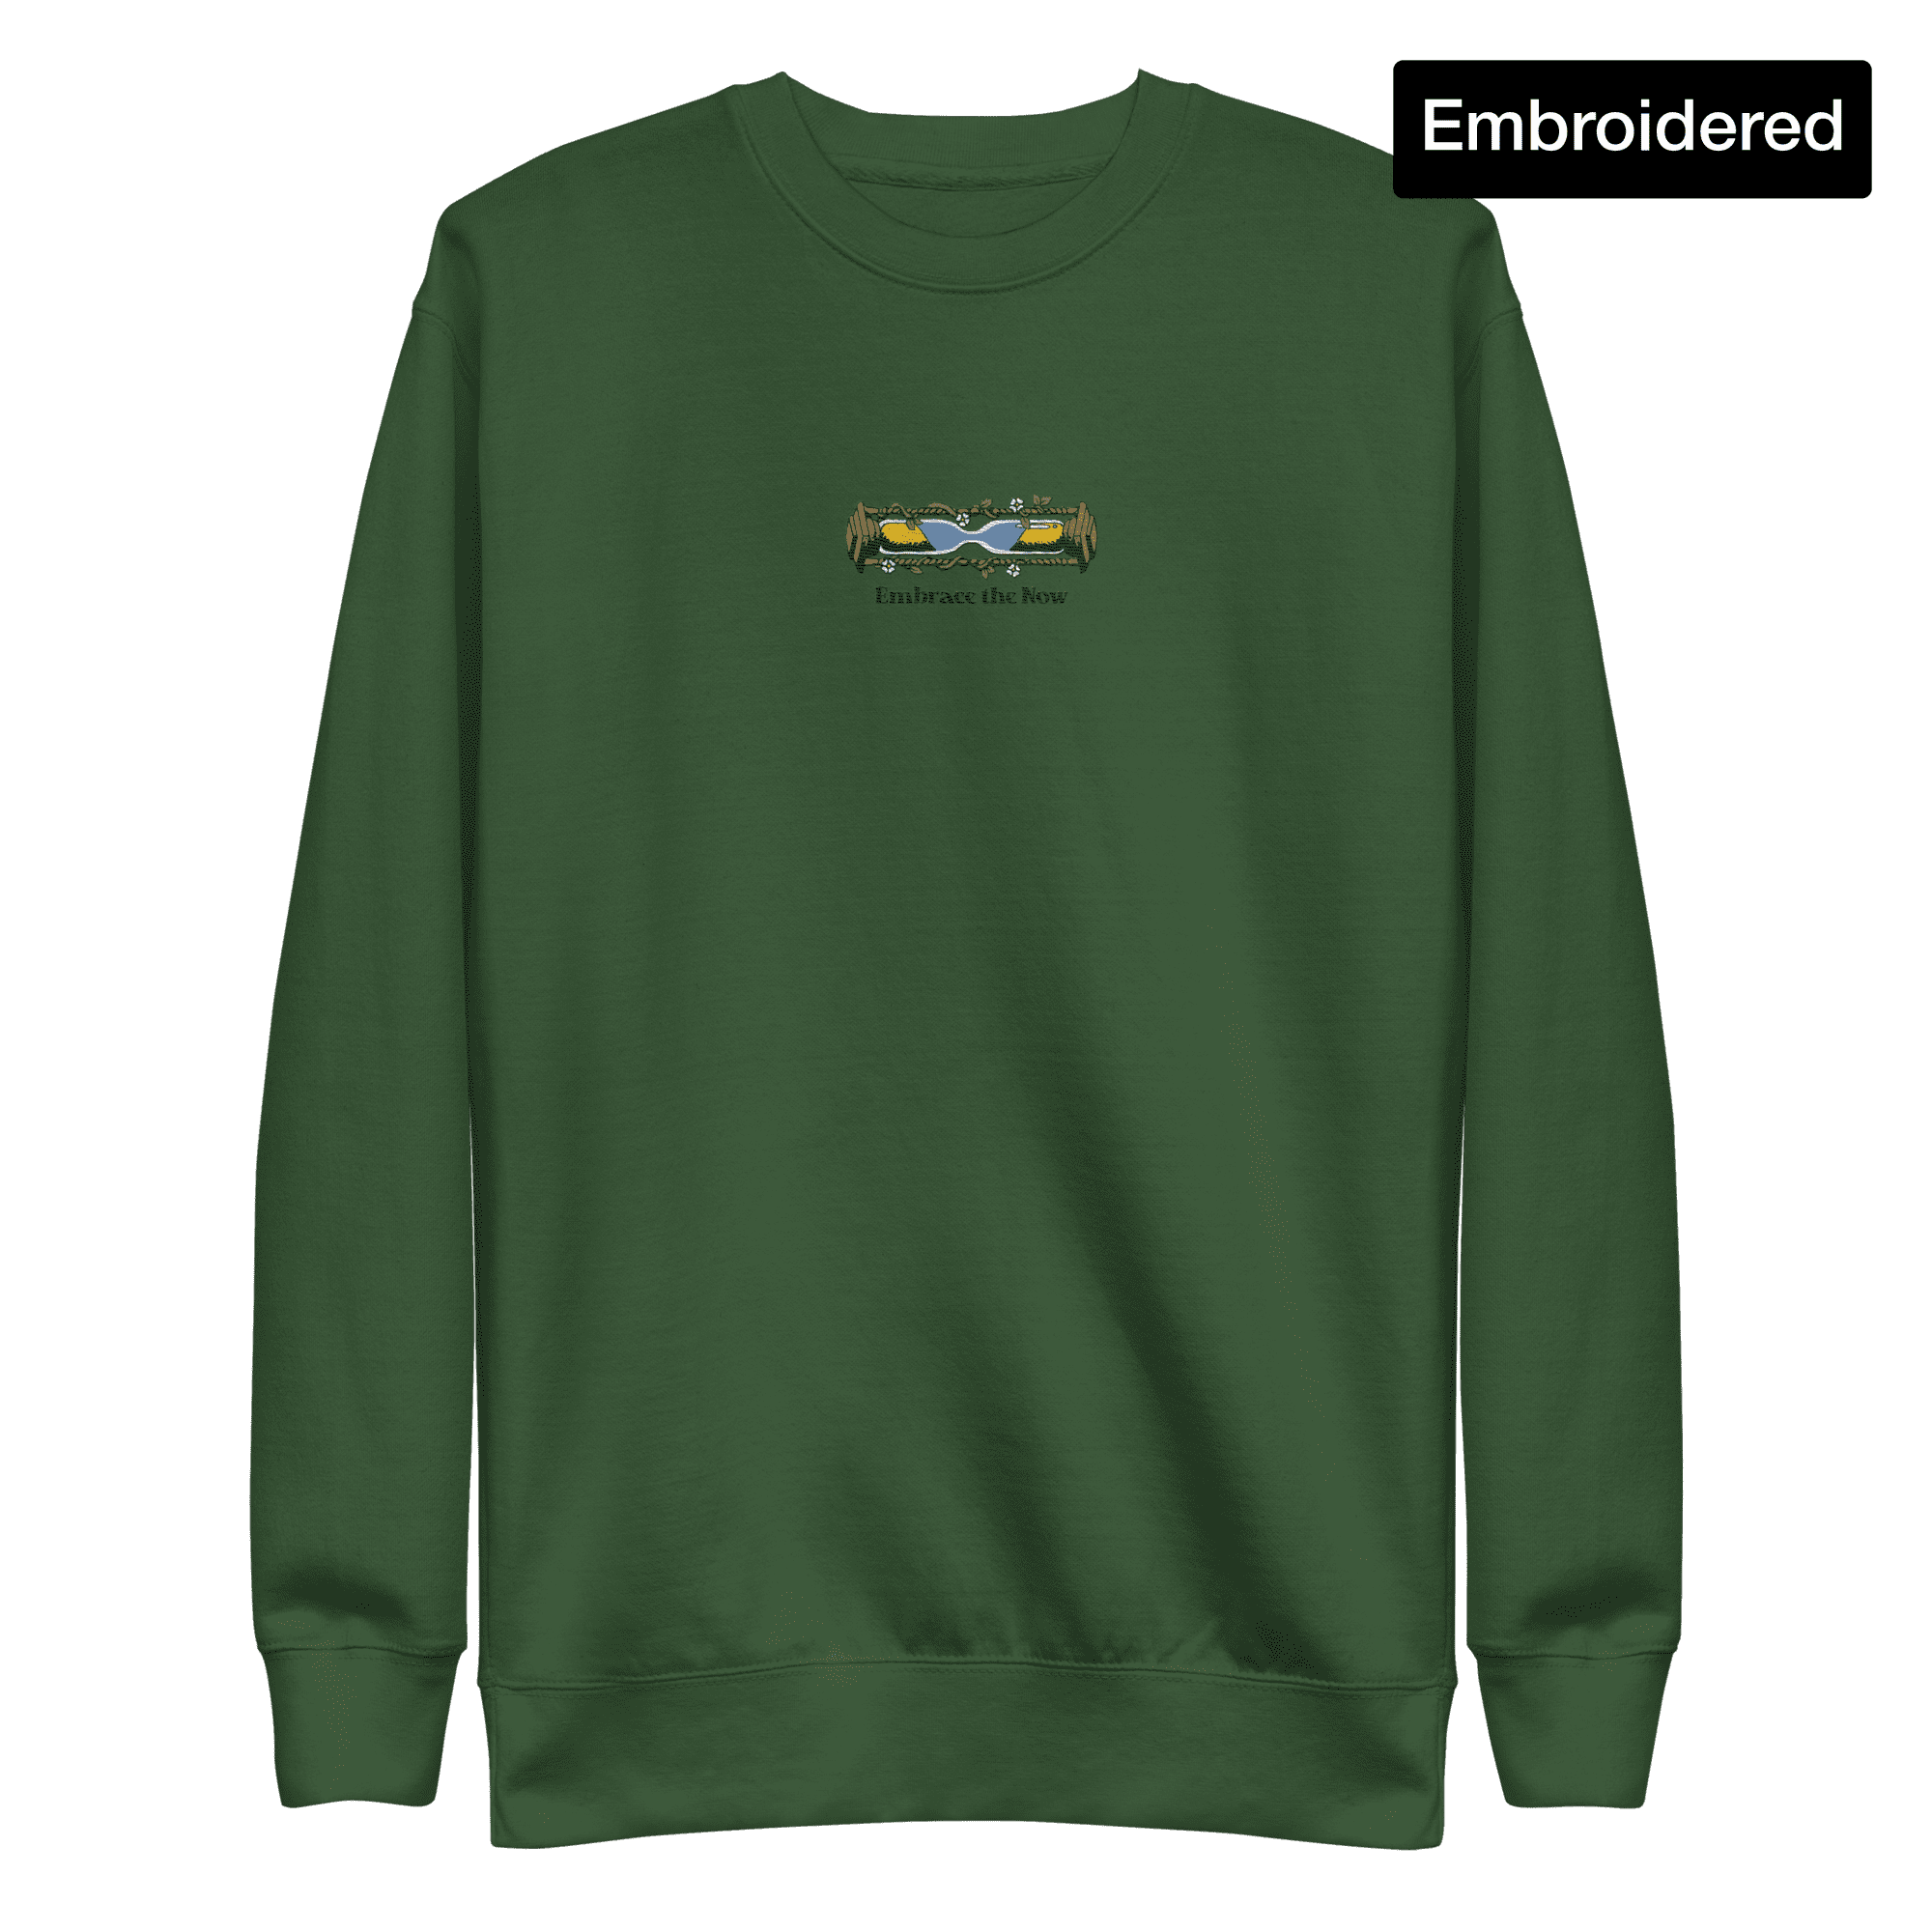 Embrace the Now Crew - Embroidered